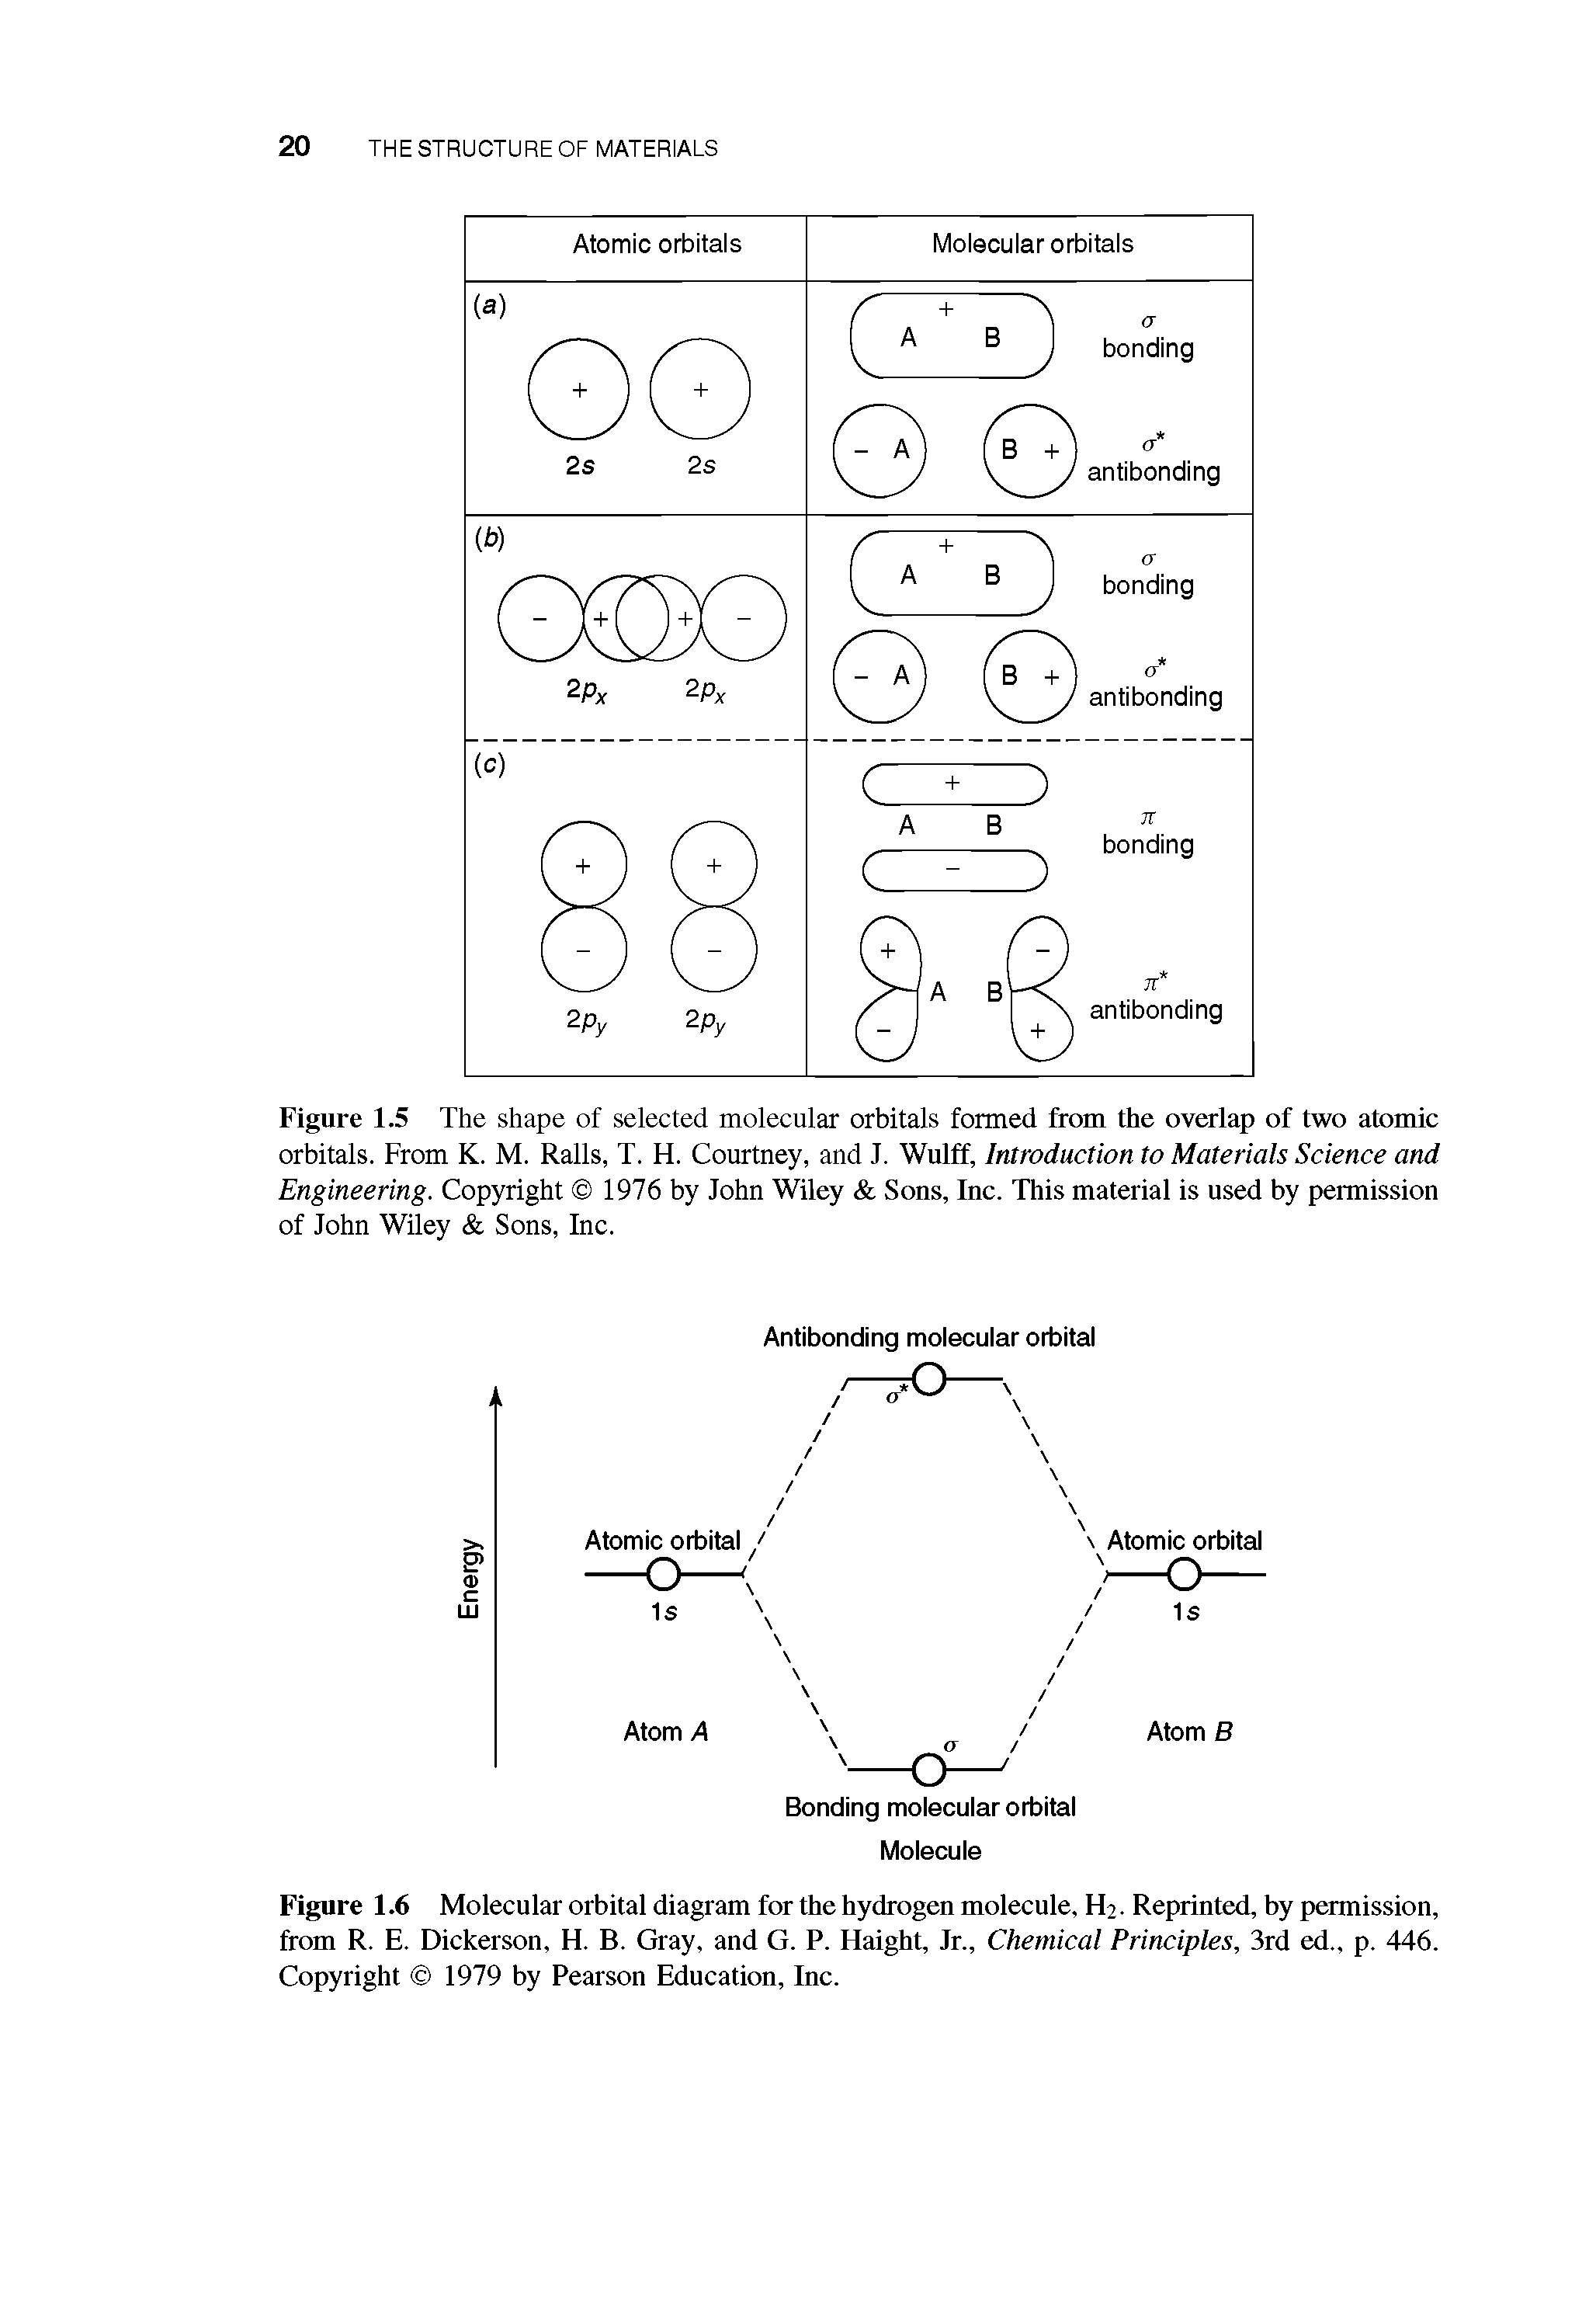 Figure 1.6 Molecular orbital diagram for the hydrogen molecule, Ha. Reprinted, by permission, from R. E. Dickerson, H. B. Gray, and G. P. Haight, Jr., Chemical Principles, 3rd ed., p. 446. Copyright 1979 by Pearson Education, Inc.